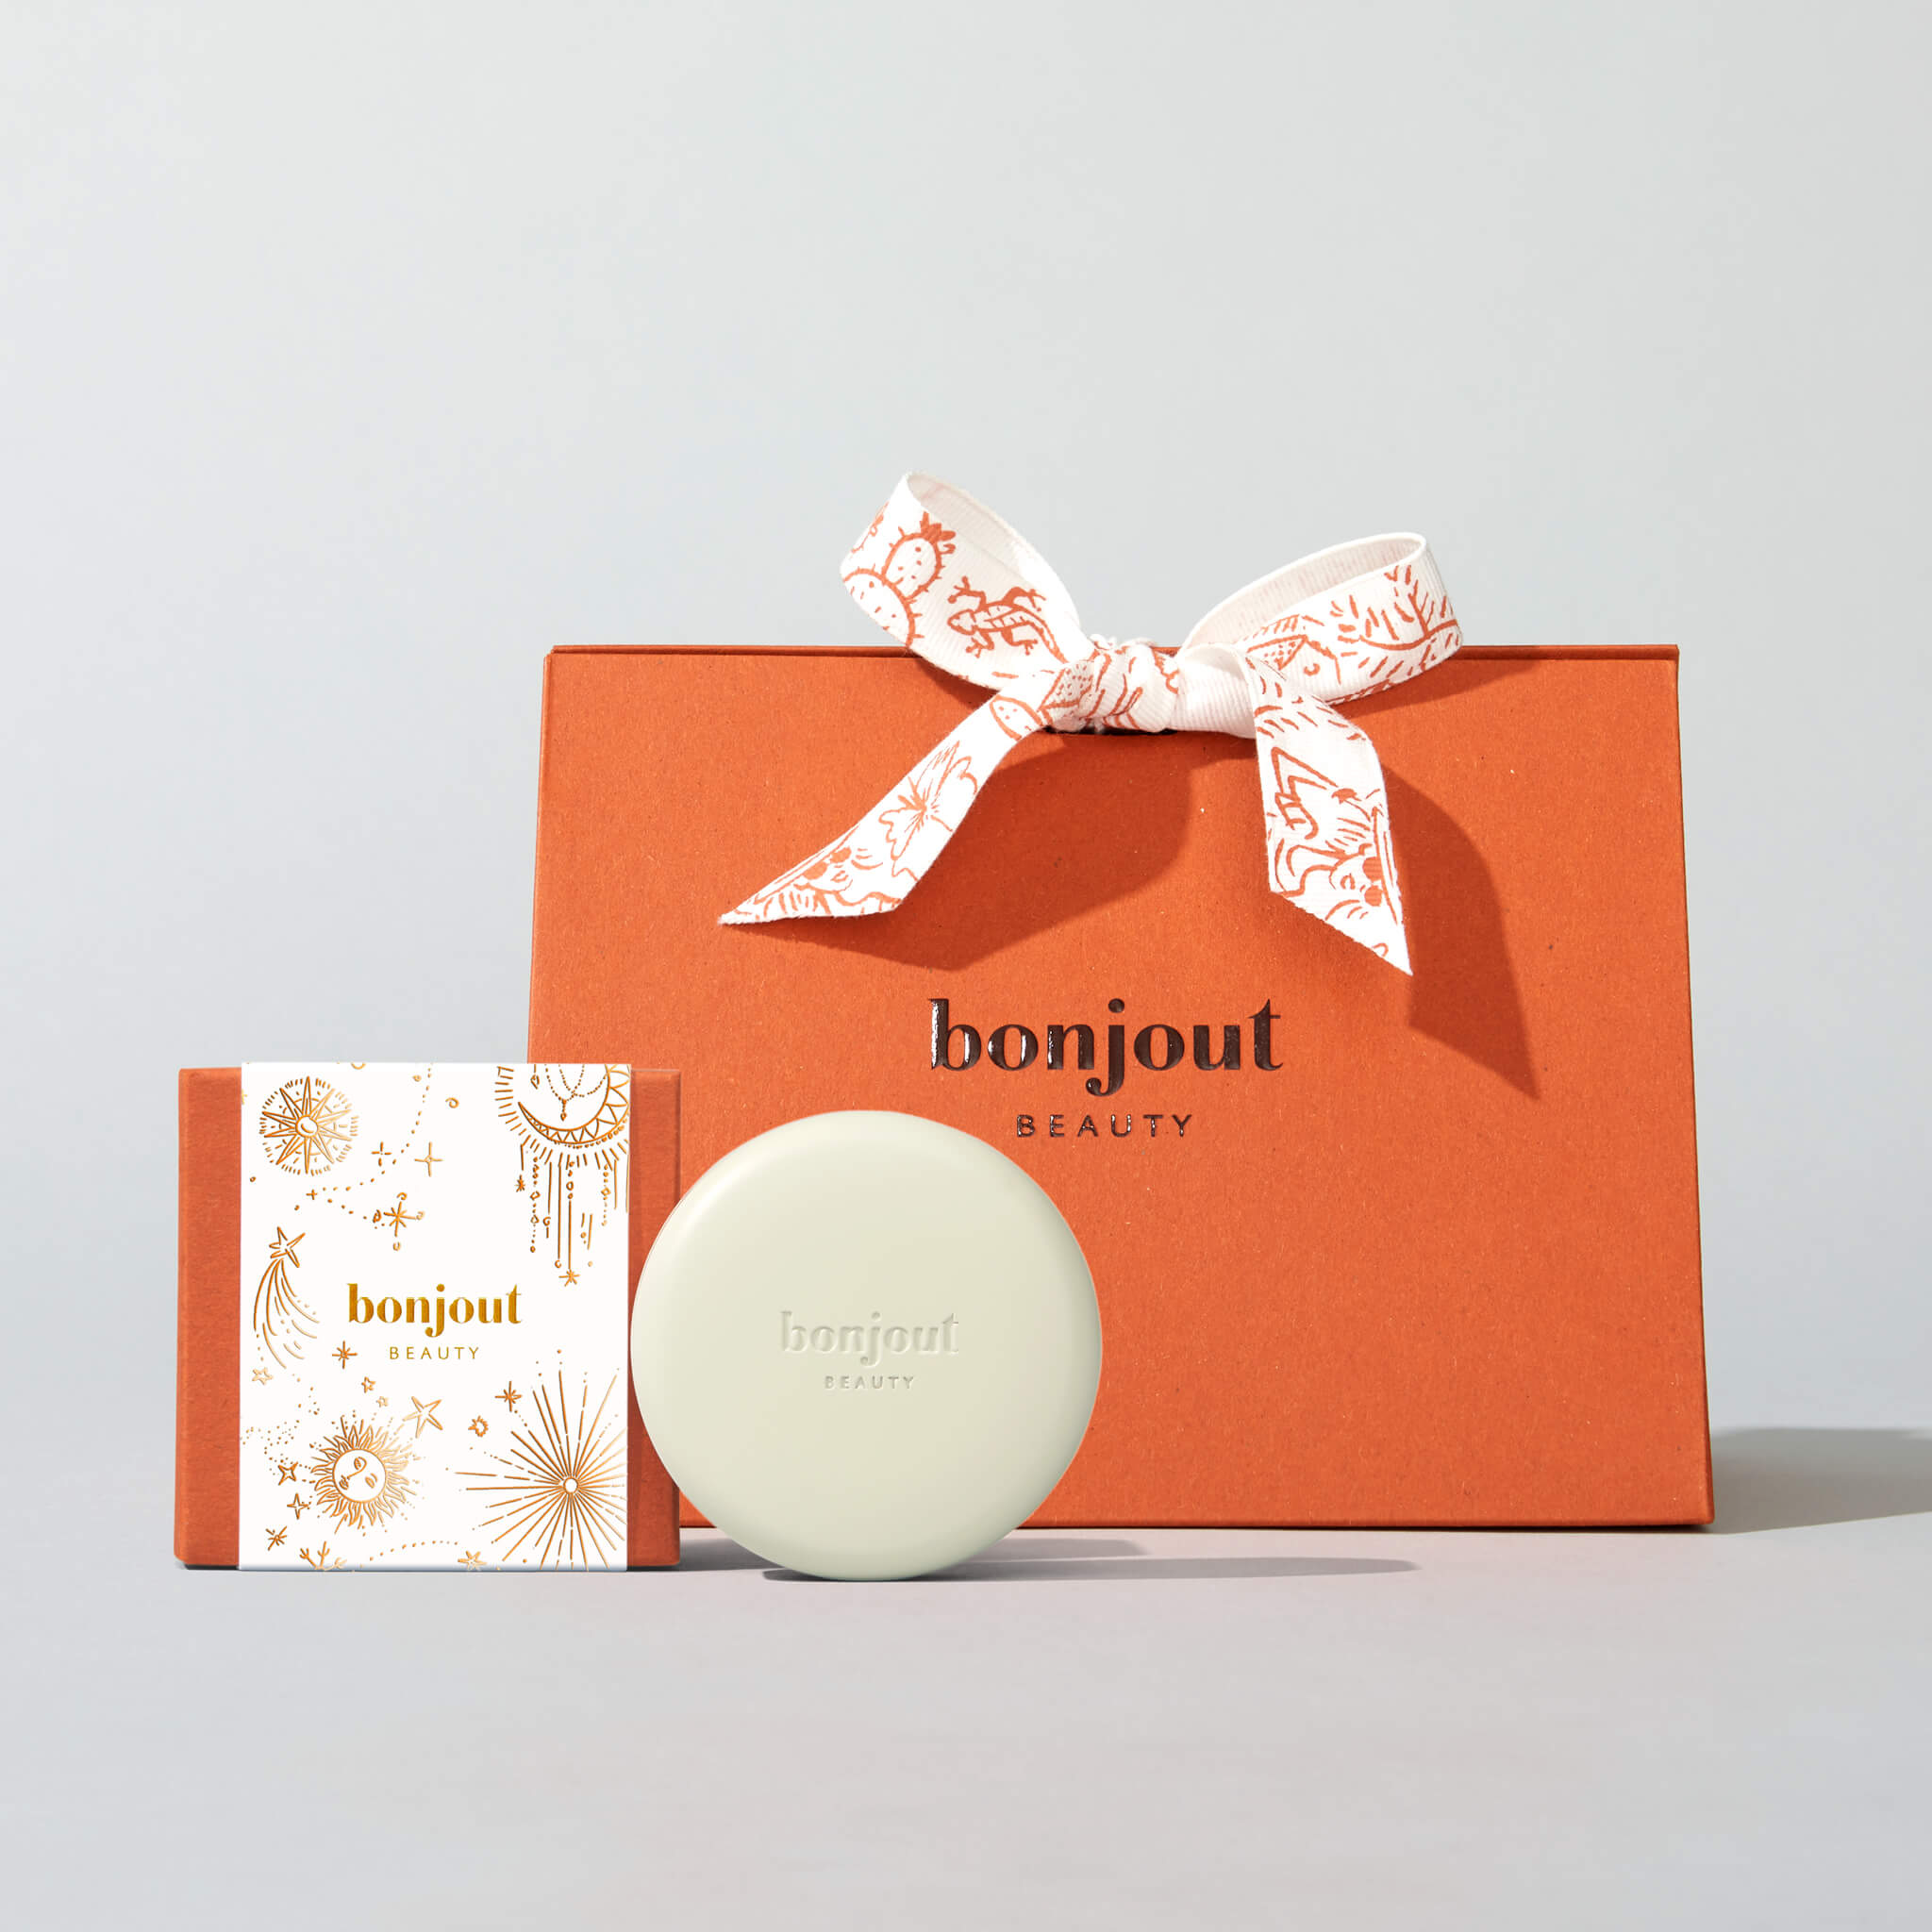 Bonjout Beauty&#39;s Le Balm Holiday Limited Edition and Gift Box